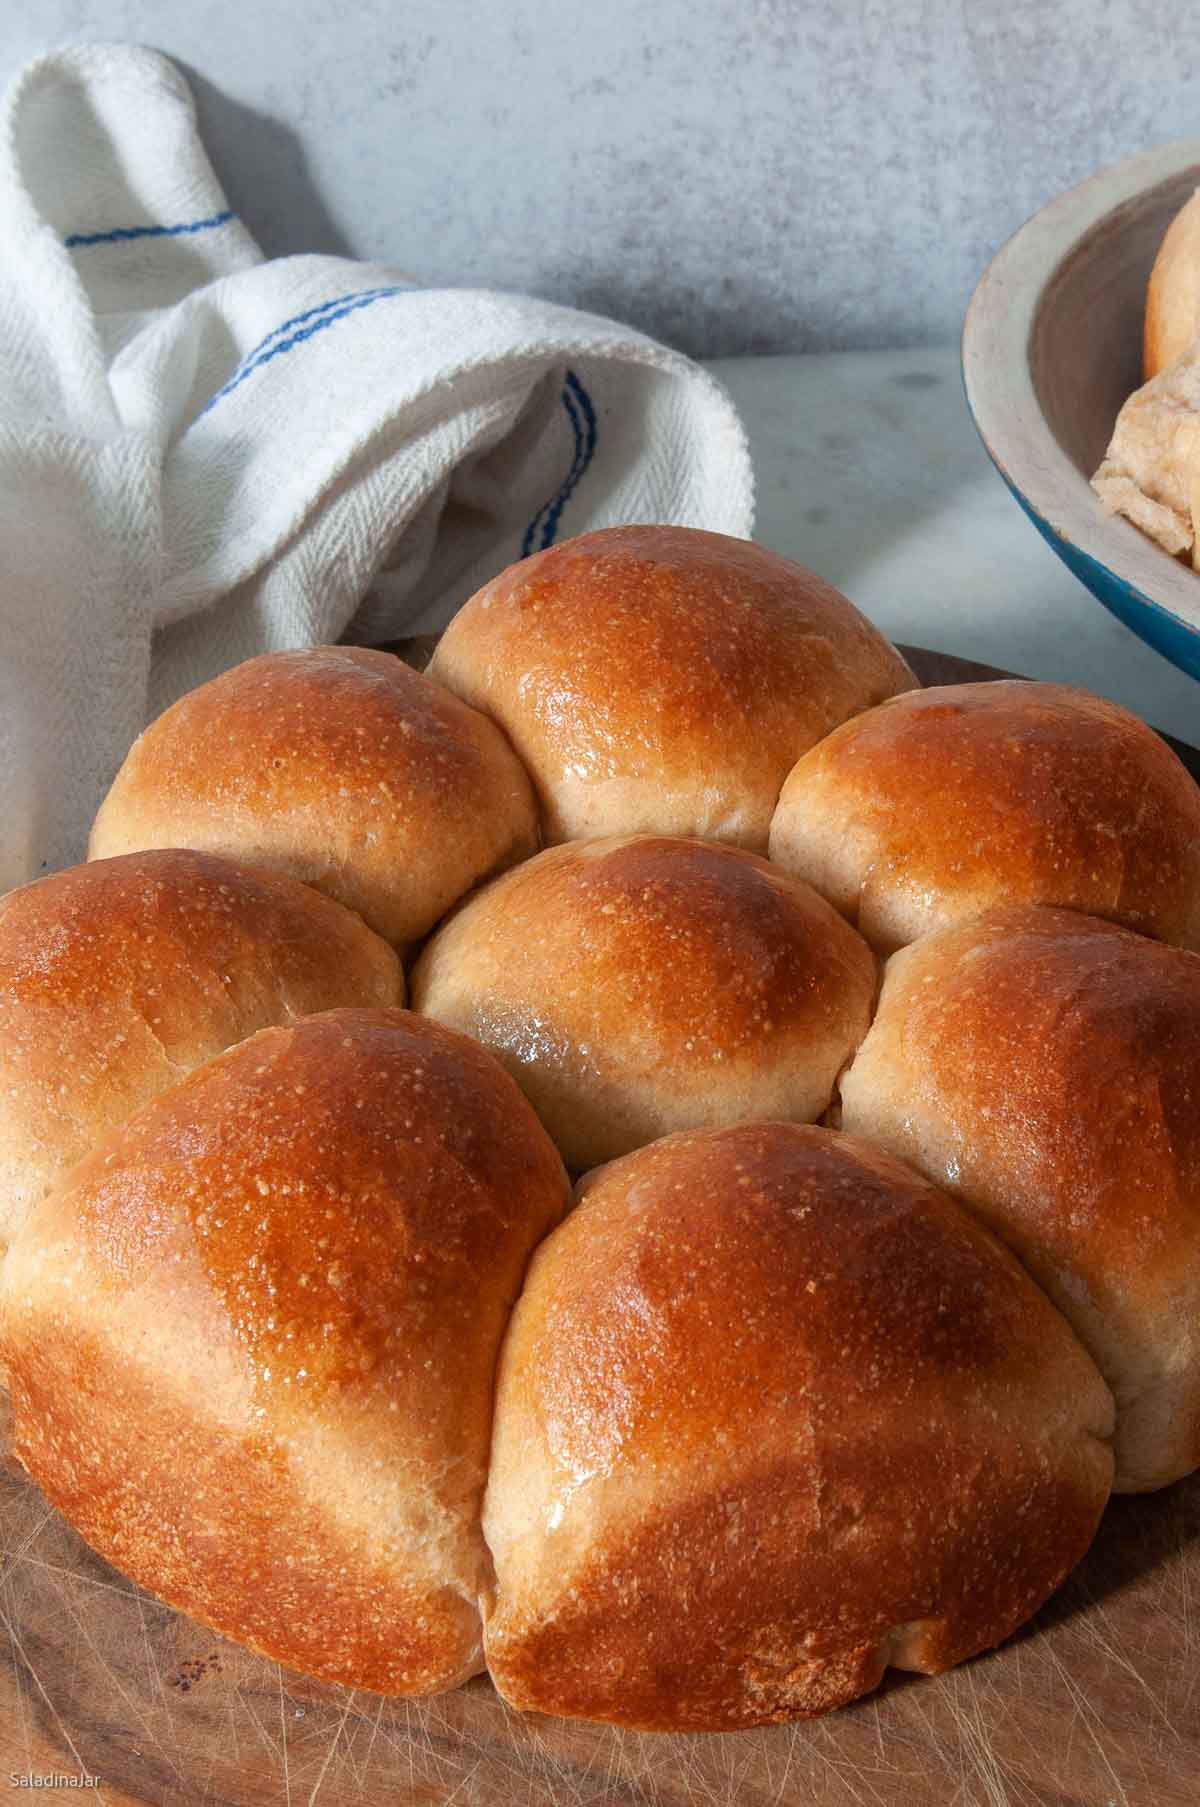 baked whole wheat rolls on a cutting board